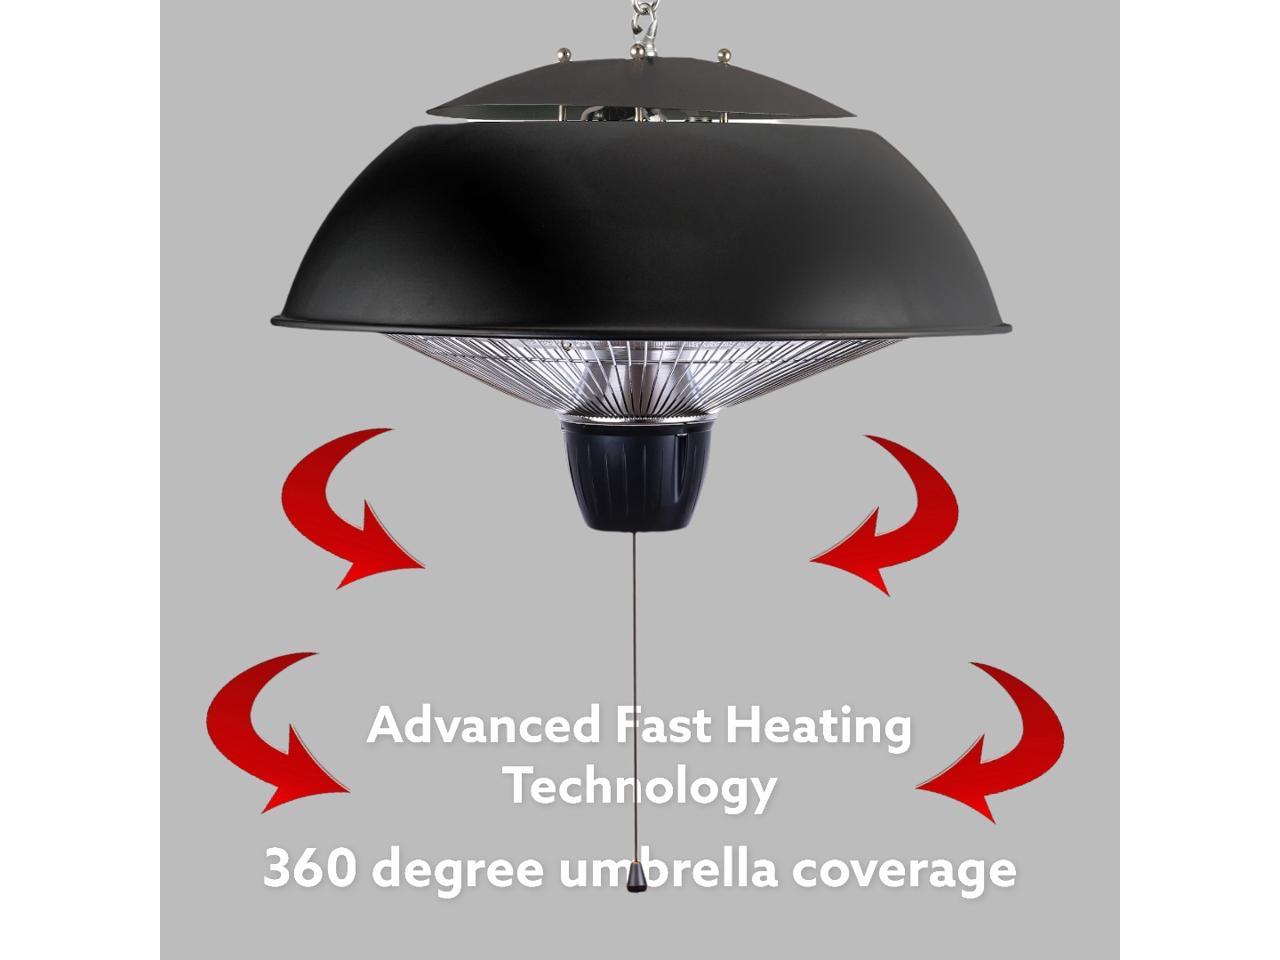 ZNERGY Infrared Electric Black Dome Ceiling Hanging heater with Dual Temperature Setting.